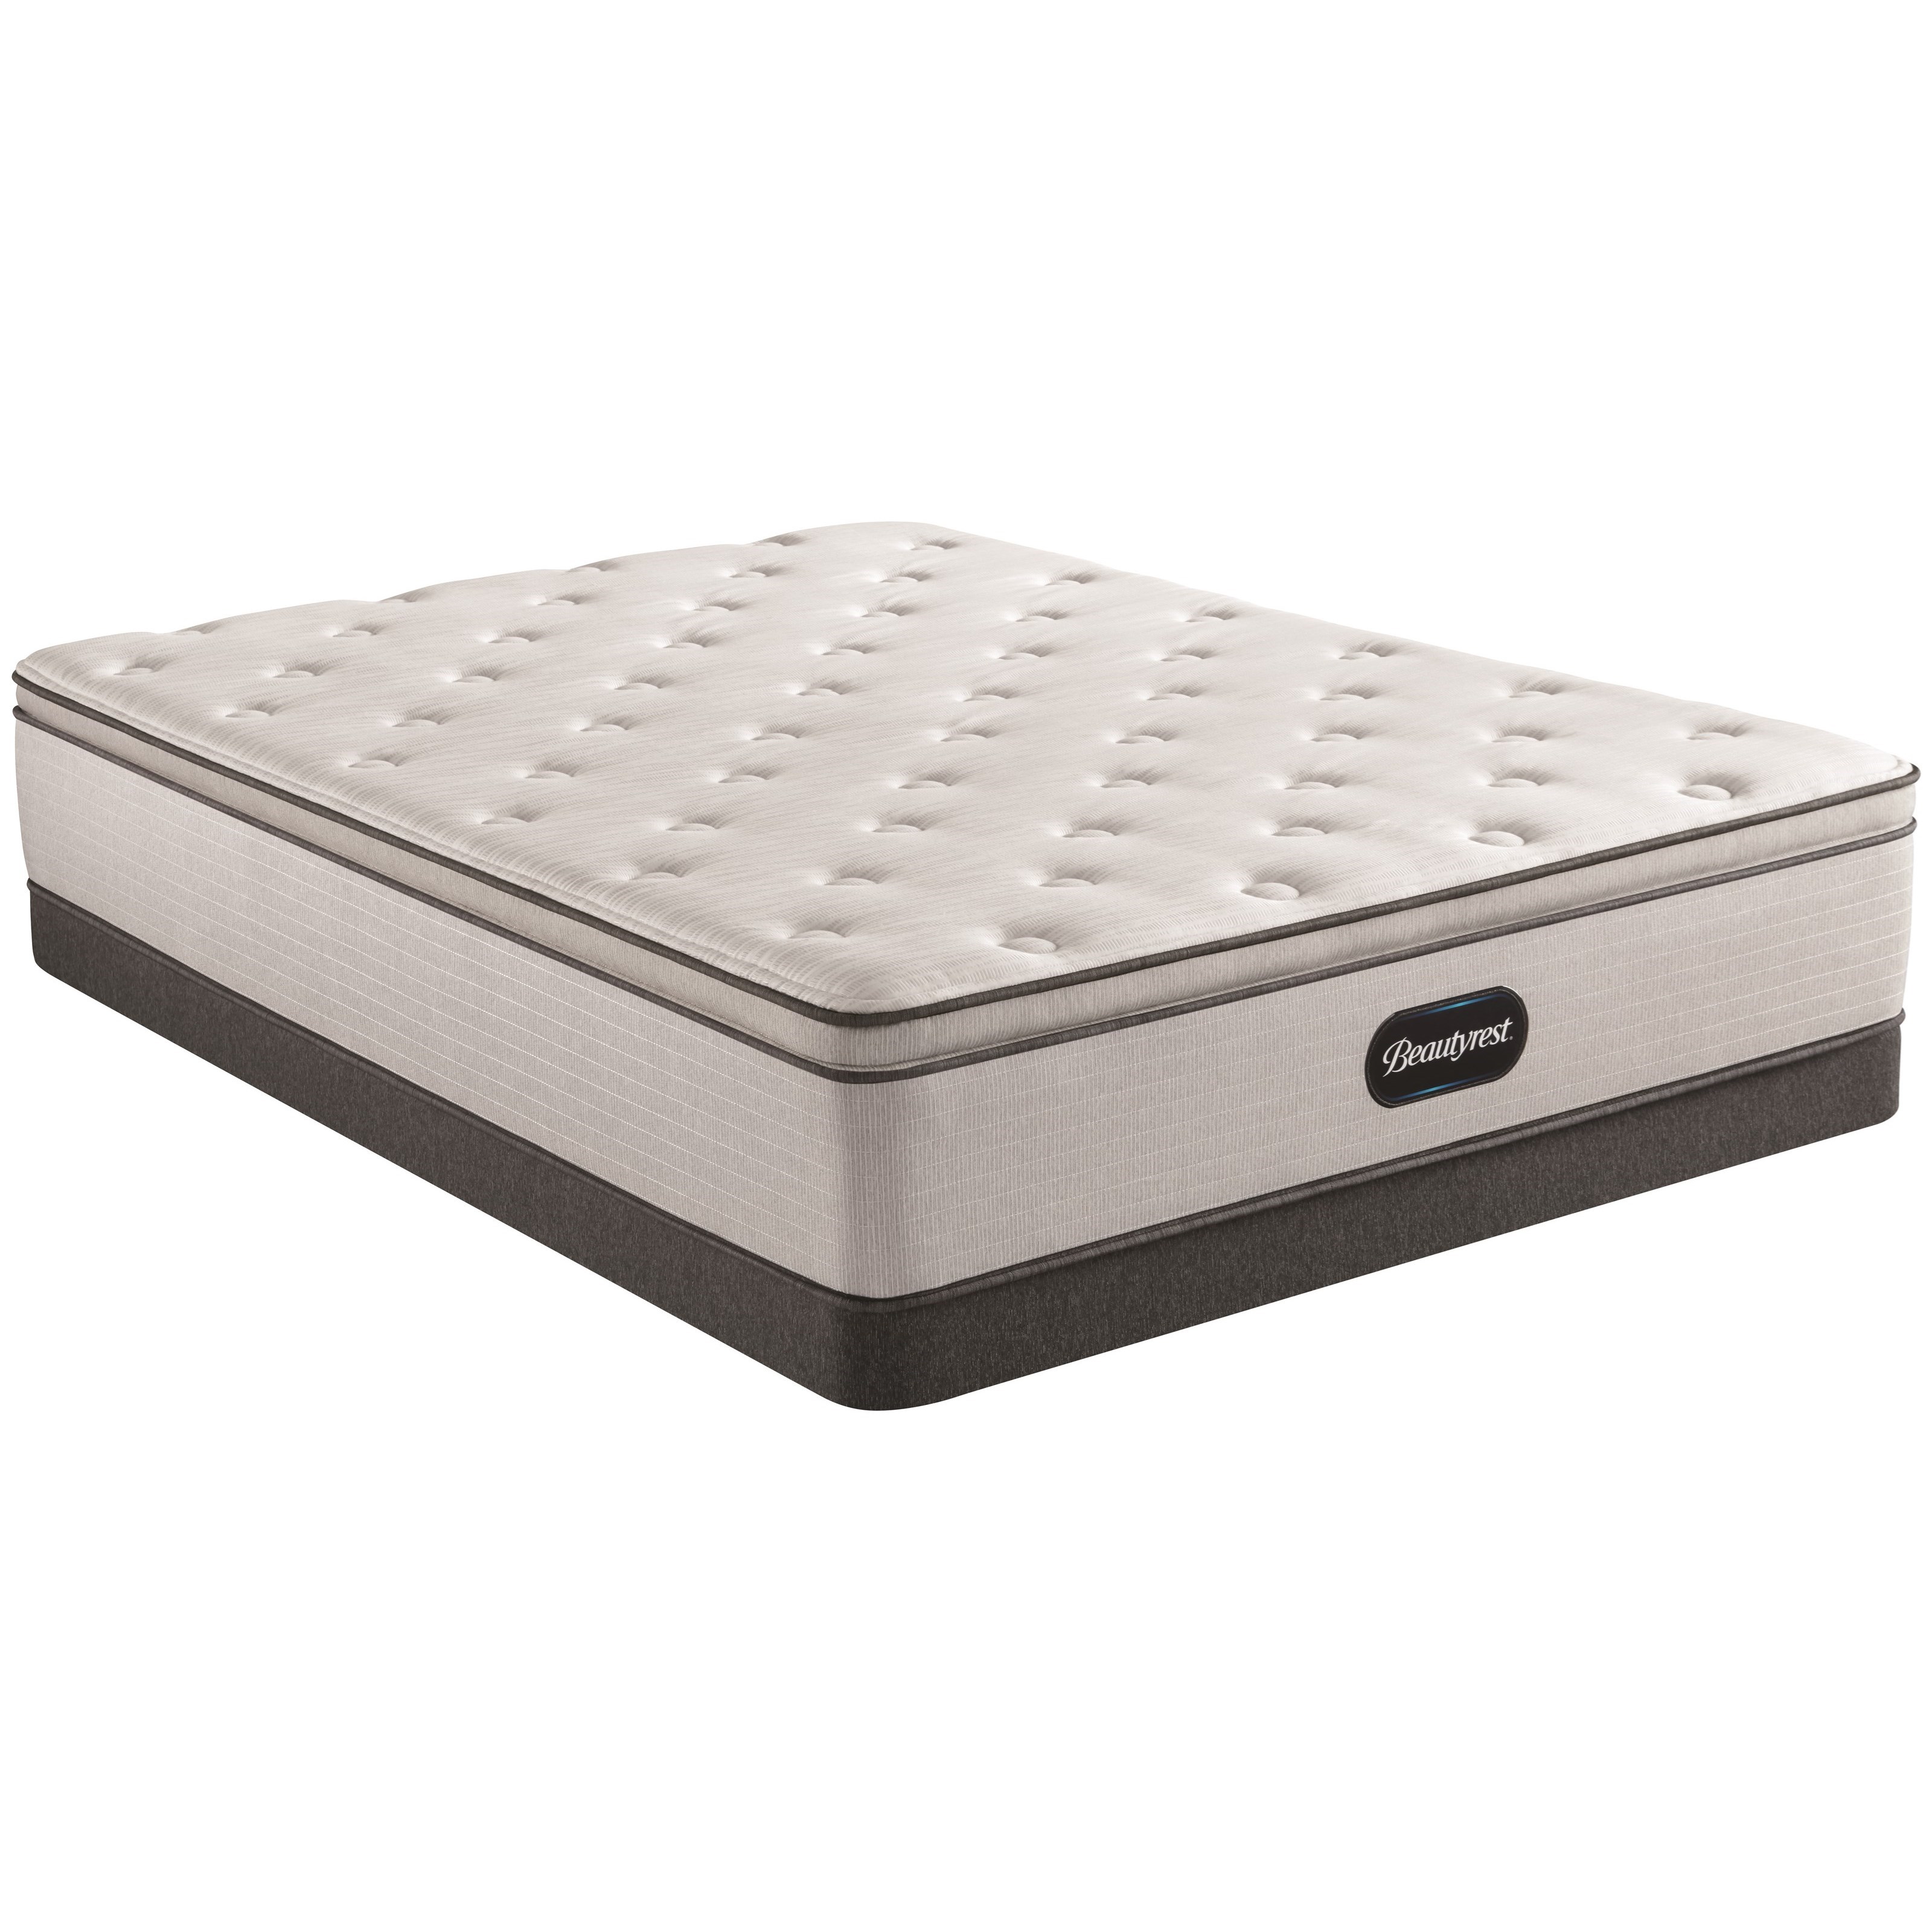 King 13 1/2" Medium Pillow Top Pocketed Coil Mattress and 5" Low Profile Foundation